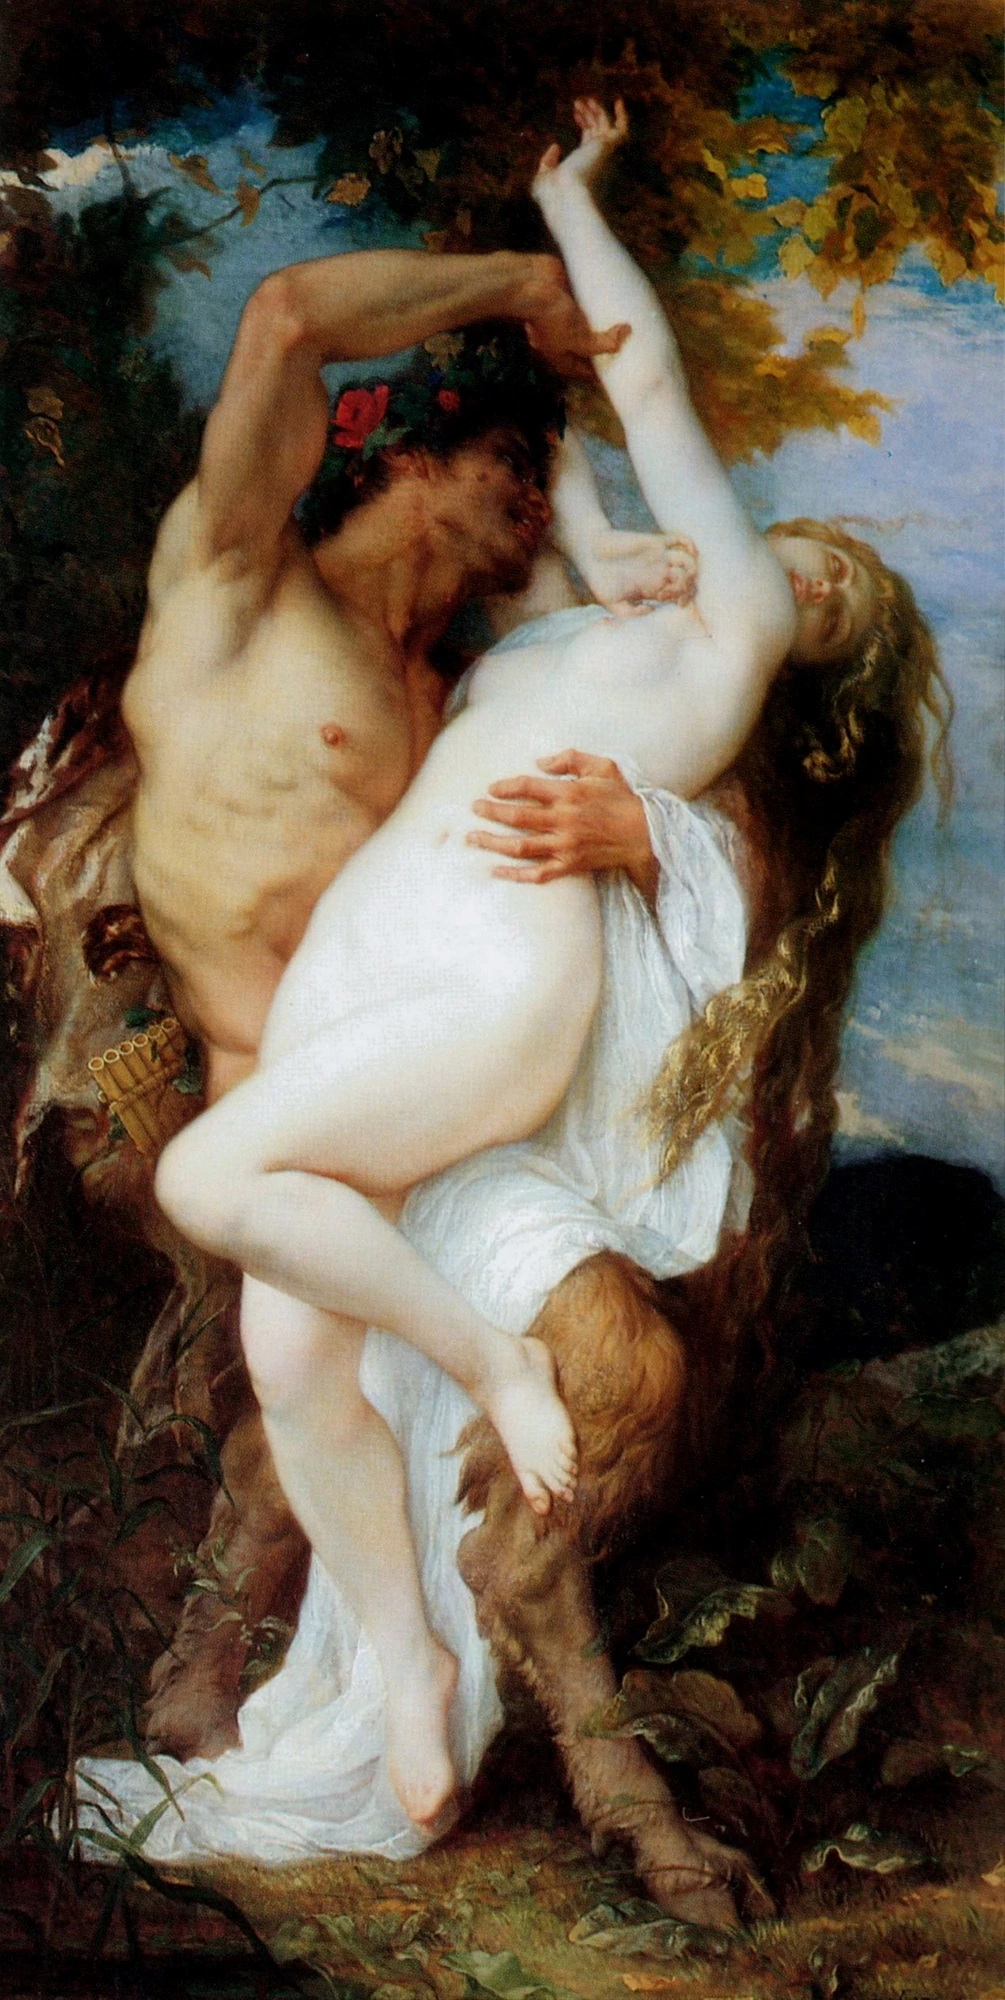 Nymph Abducted by a Satyr, Alexandre Cabanel